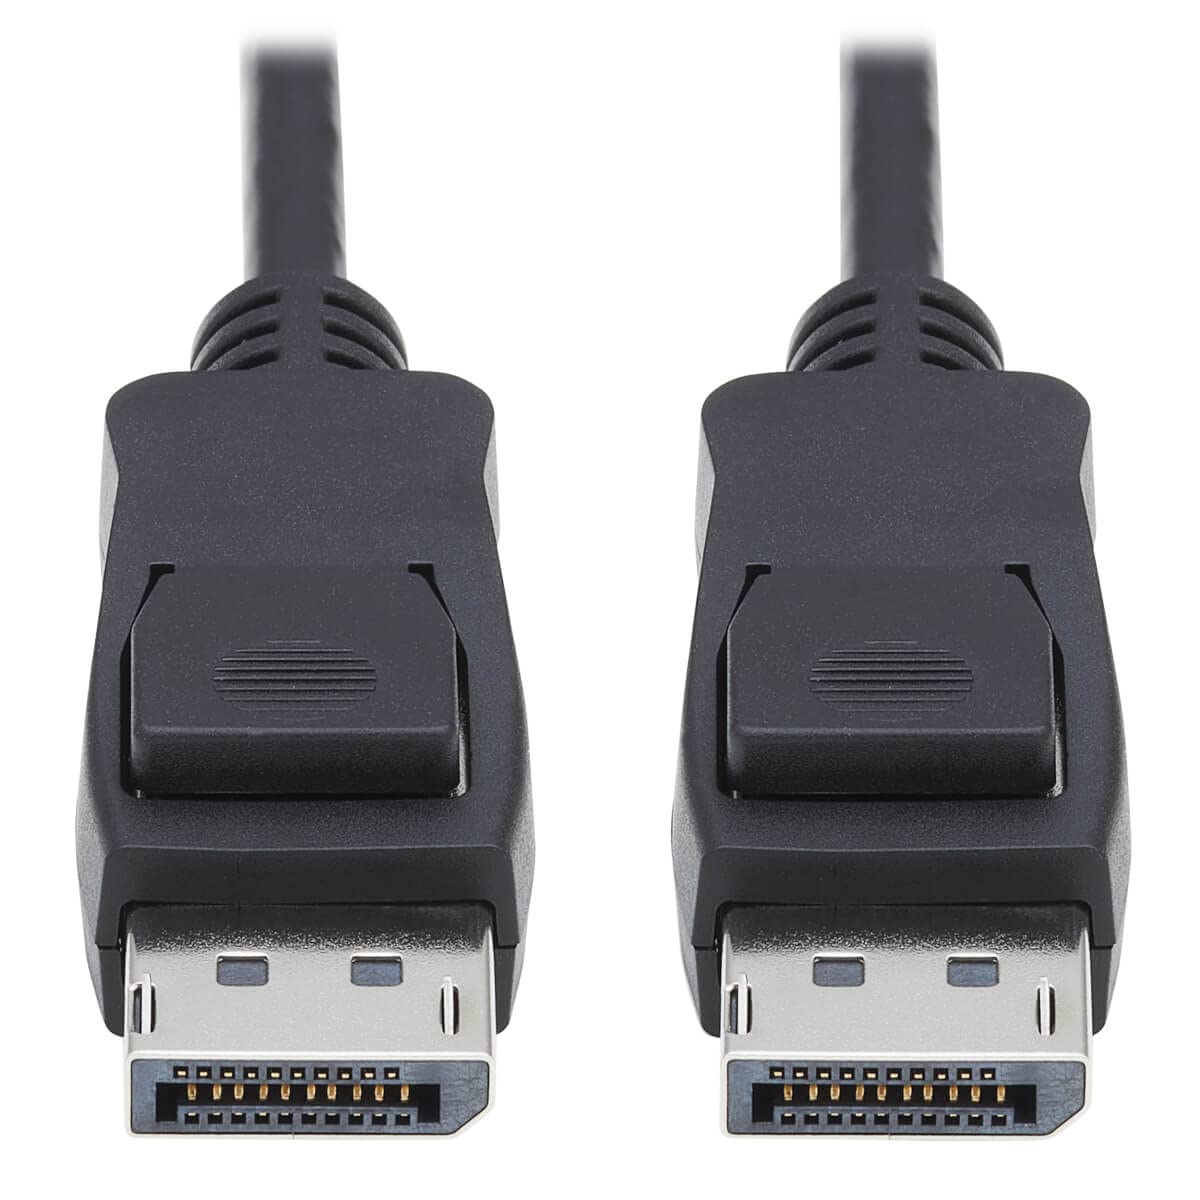 Tripp Lite High Speed DisplayPort Cable, DP 1.4 Cable with Latching Connectors, 8K High-Definition Video @ 30Hz, HDR, 4:2:0, HDCP 2.2 (M/M) 10 Feet / 3.1 Meters, Lifelong Warranty (P580-010-V4)